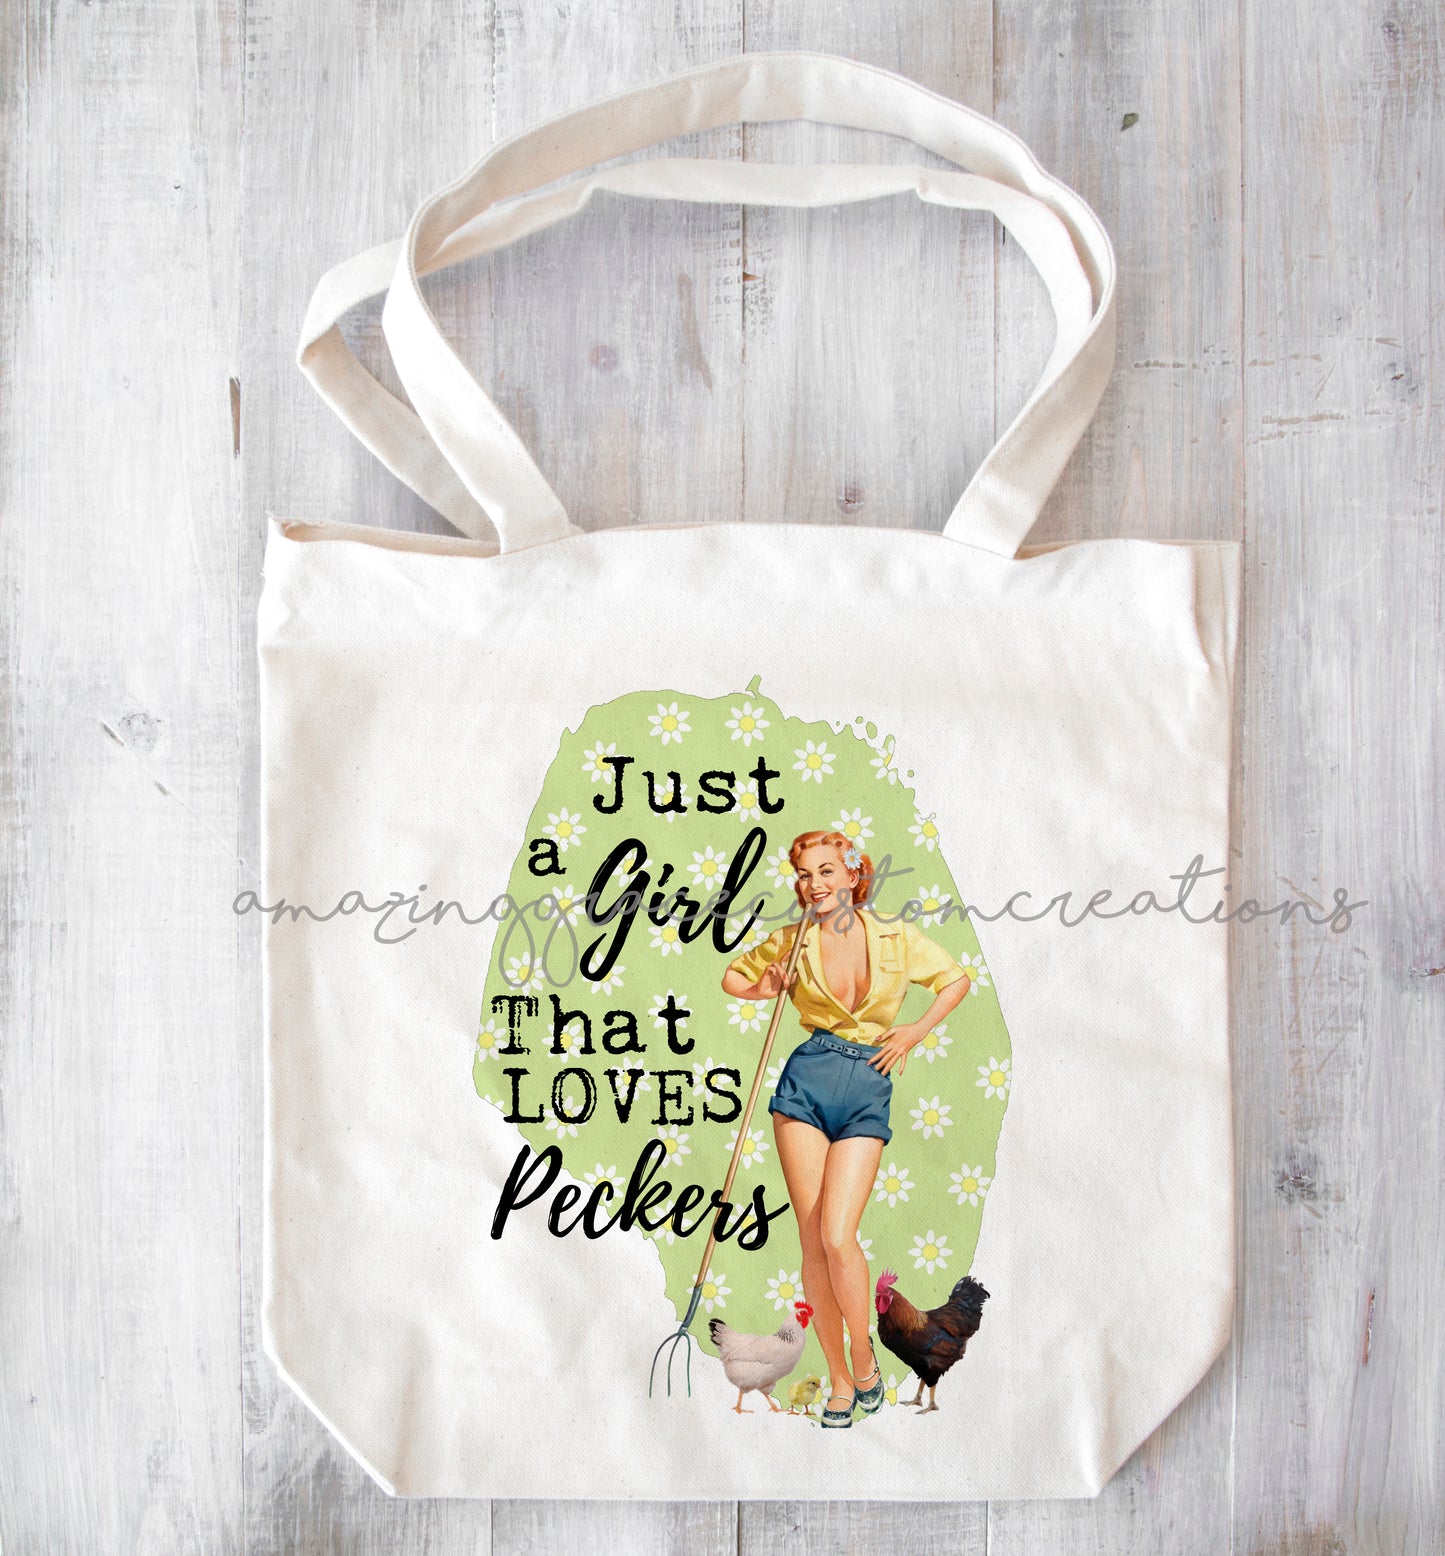 RETRO HOUSEWIVES tote bag